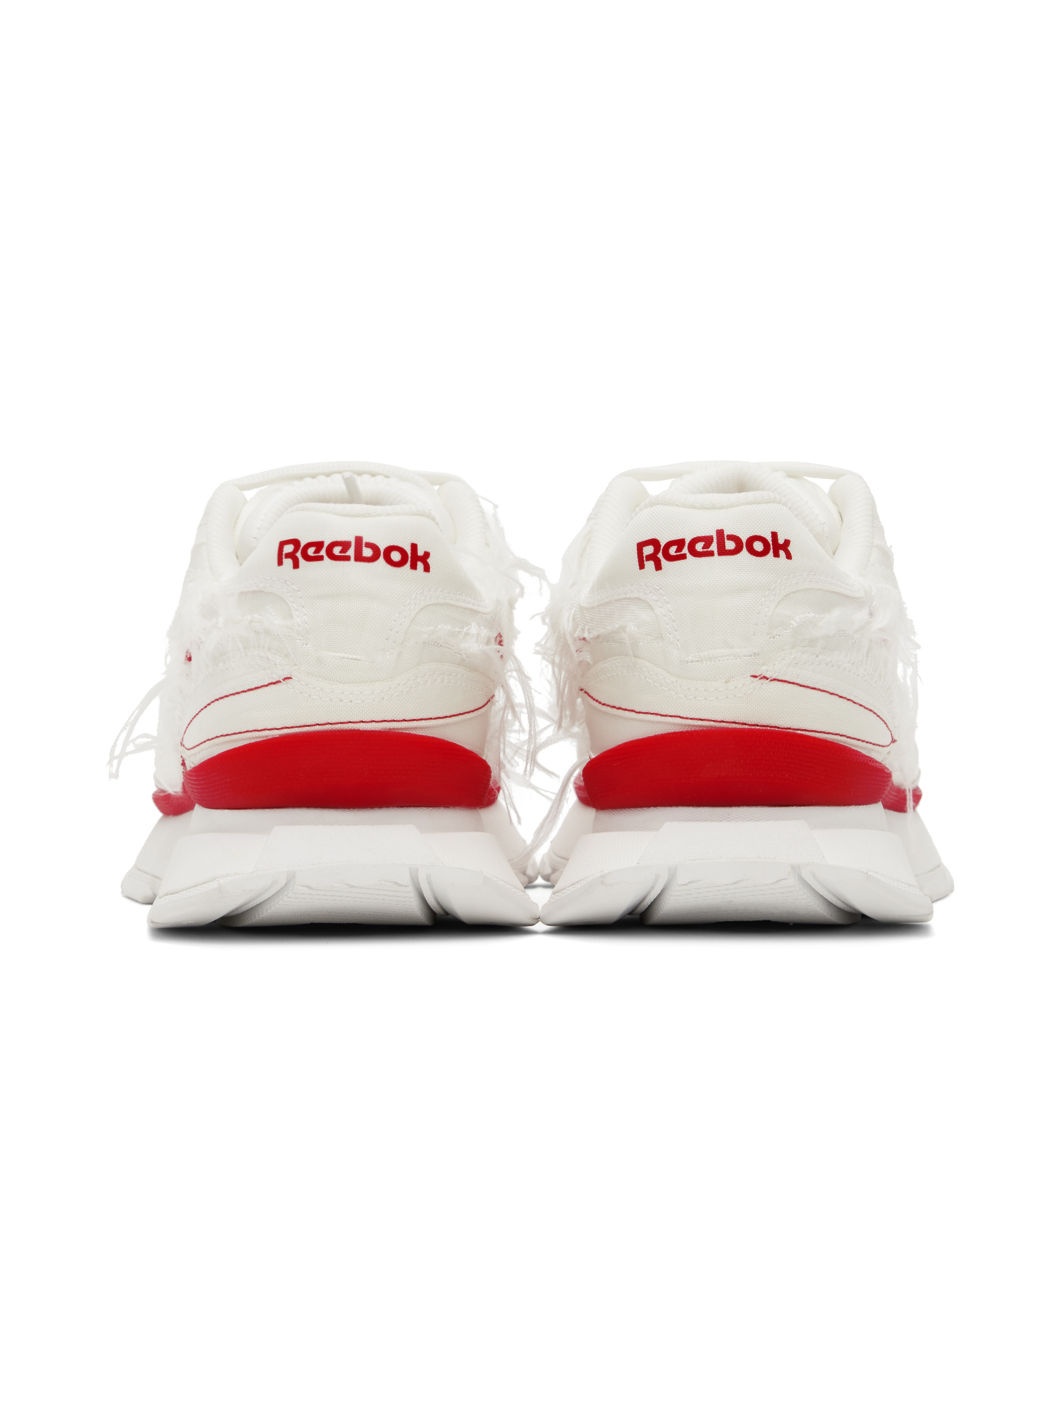 White Reebok Edition Classic Leather LTD Sneakers - 2